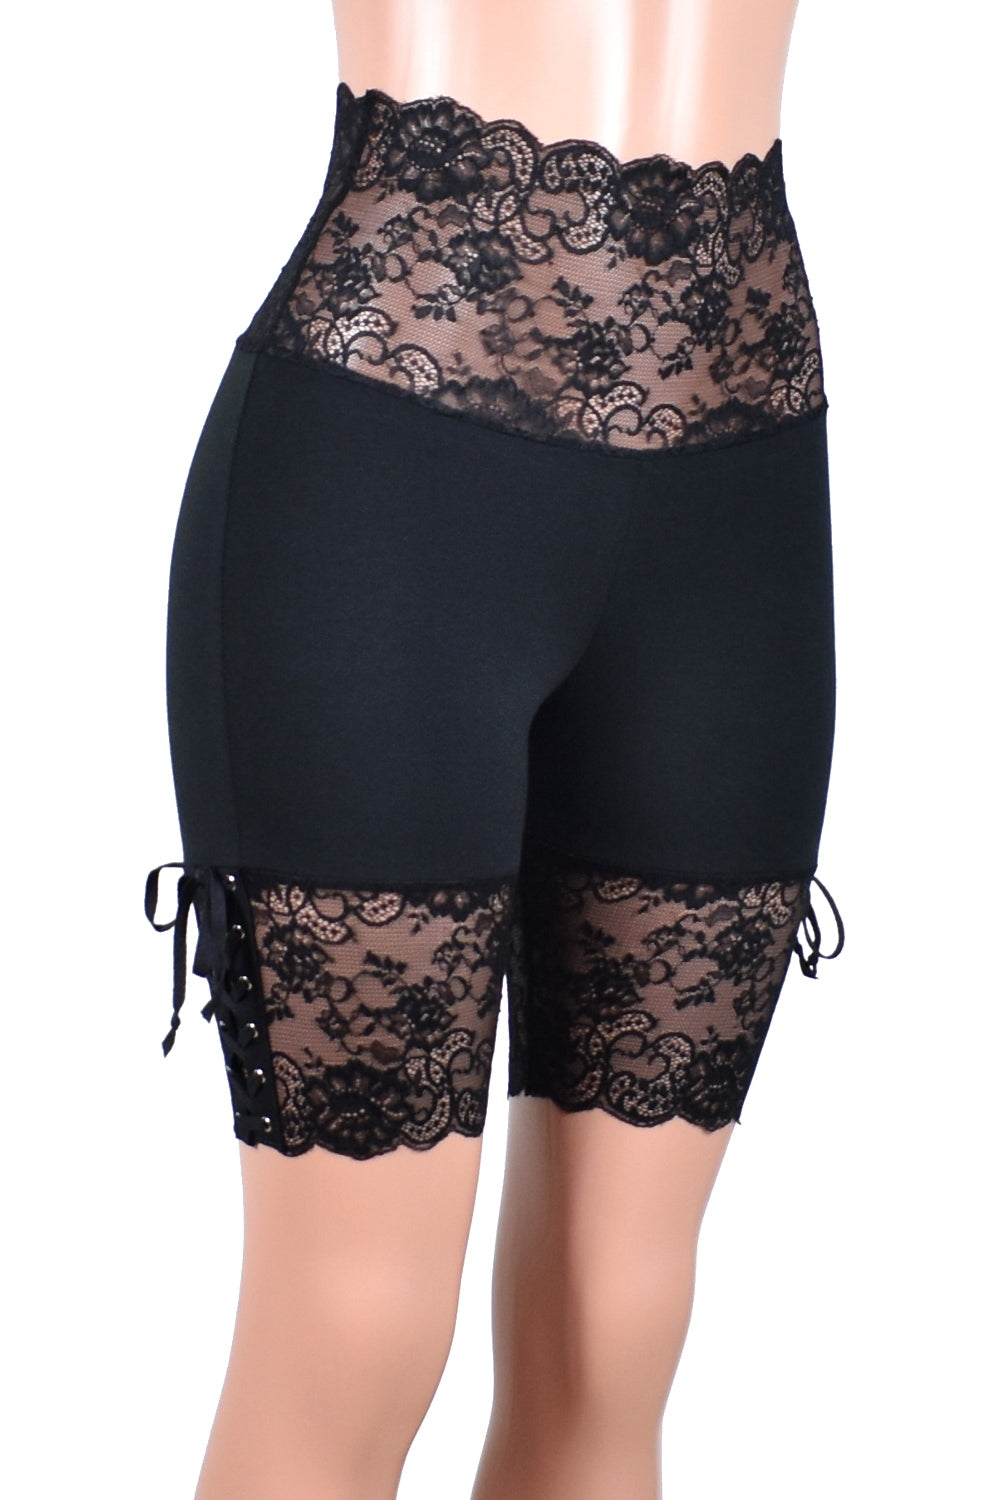 Wide Waistband Black Lace-Up Stretch Lace Shorts (8.5" inseam)